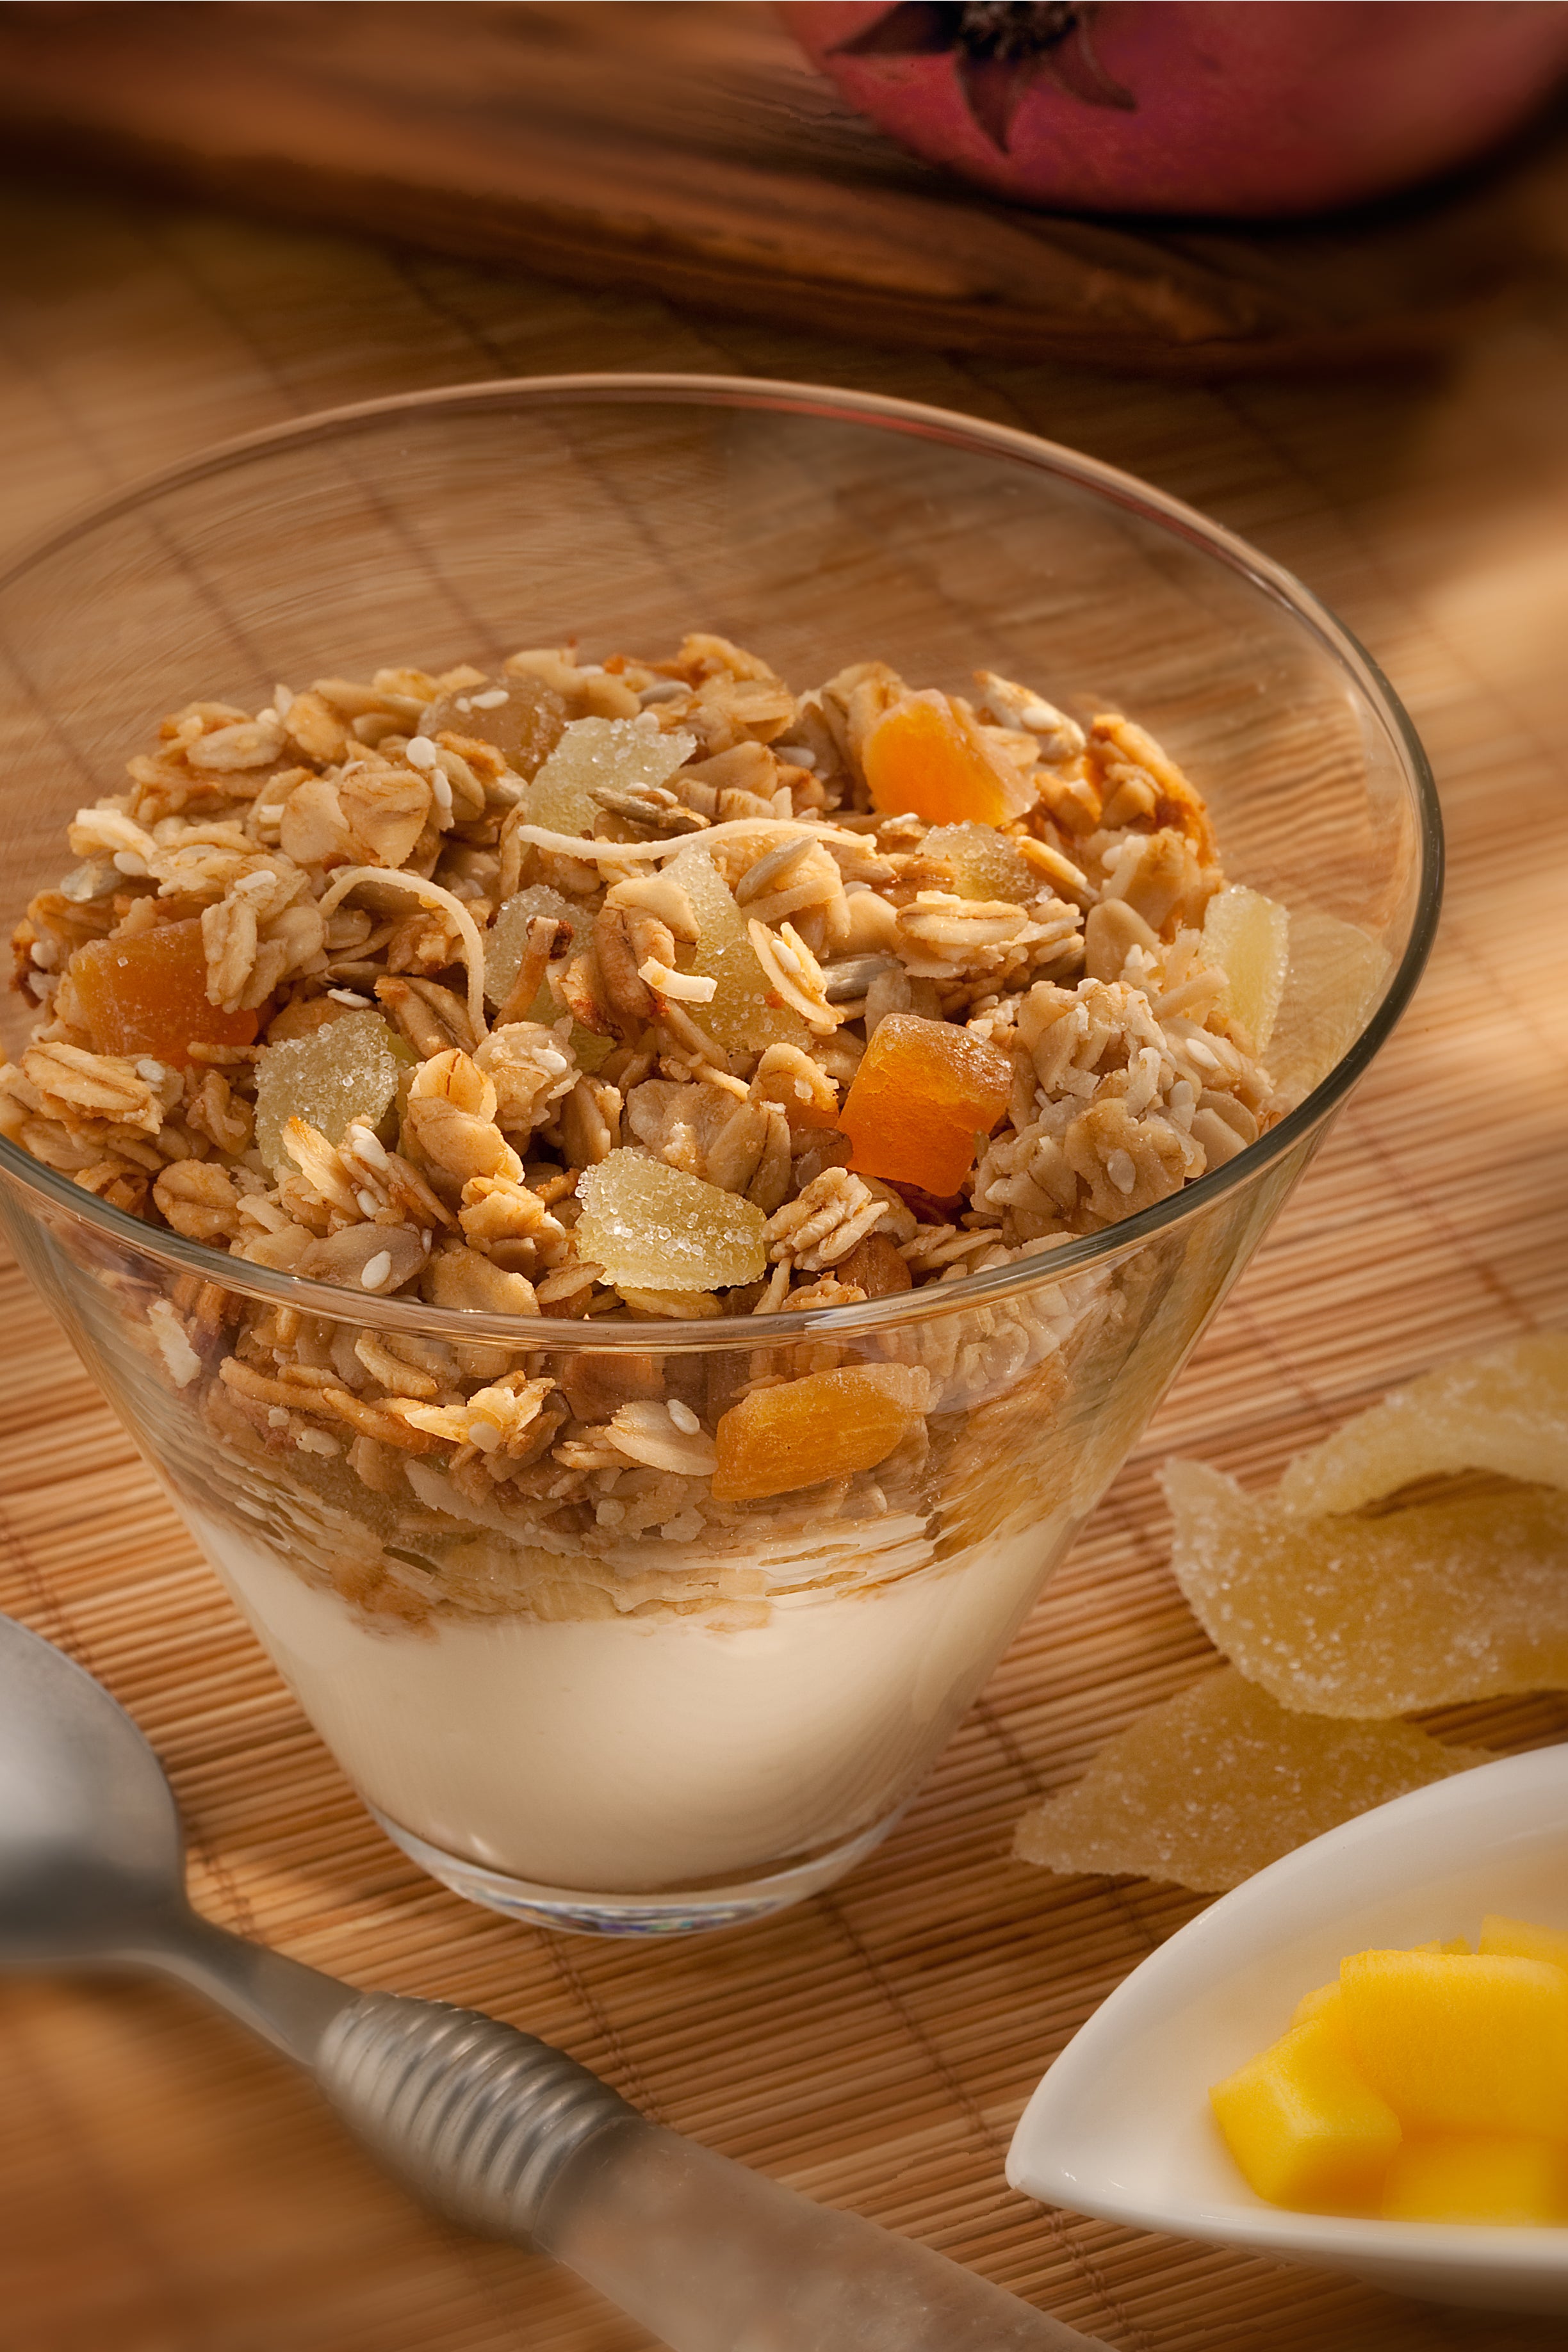 Can you tell me some of the best ways to eat Anahola Granola?